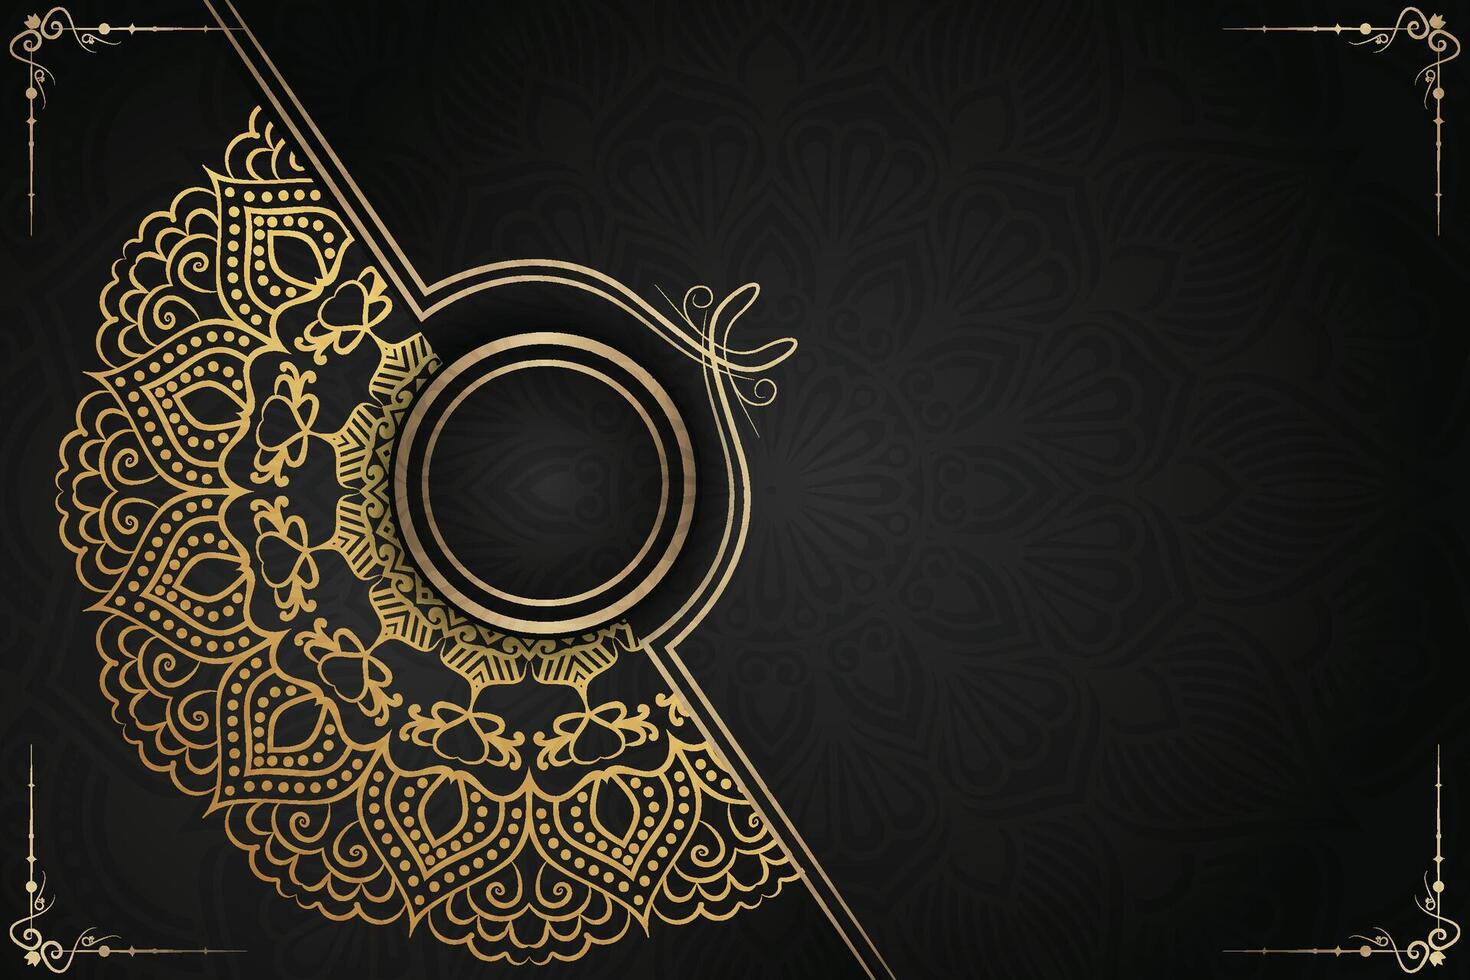 Luxurious mandala background and banner design, suitable for design templates for greeting cards vector